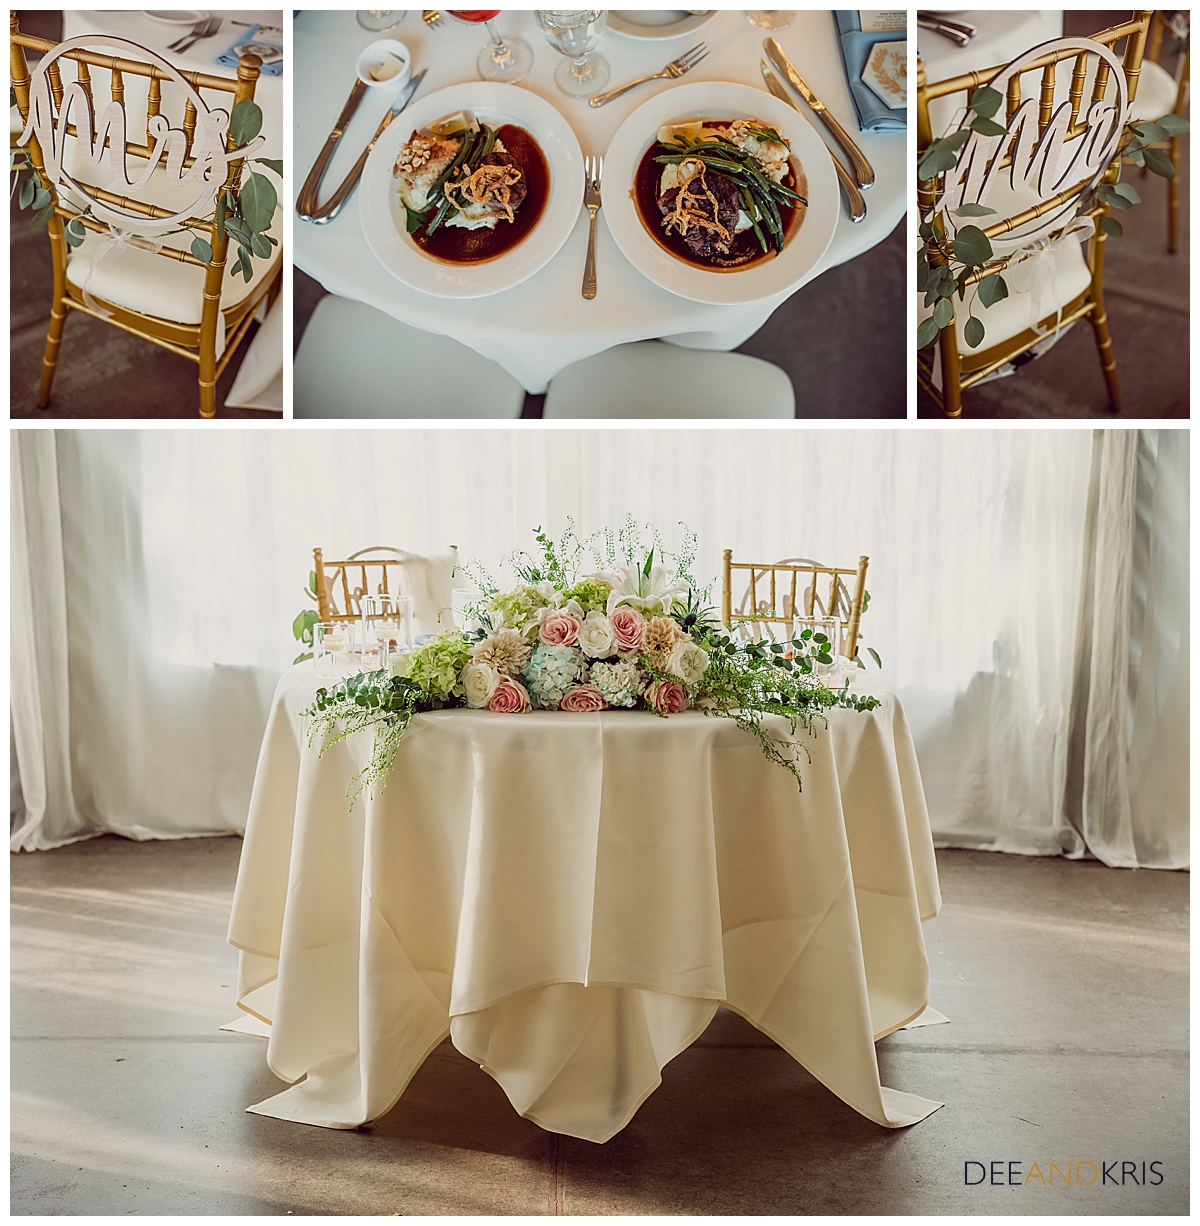 Details of Sweetheart Table and Meal